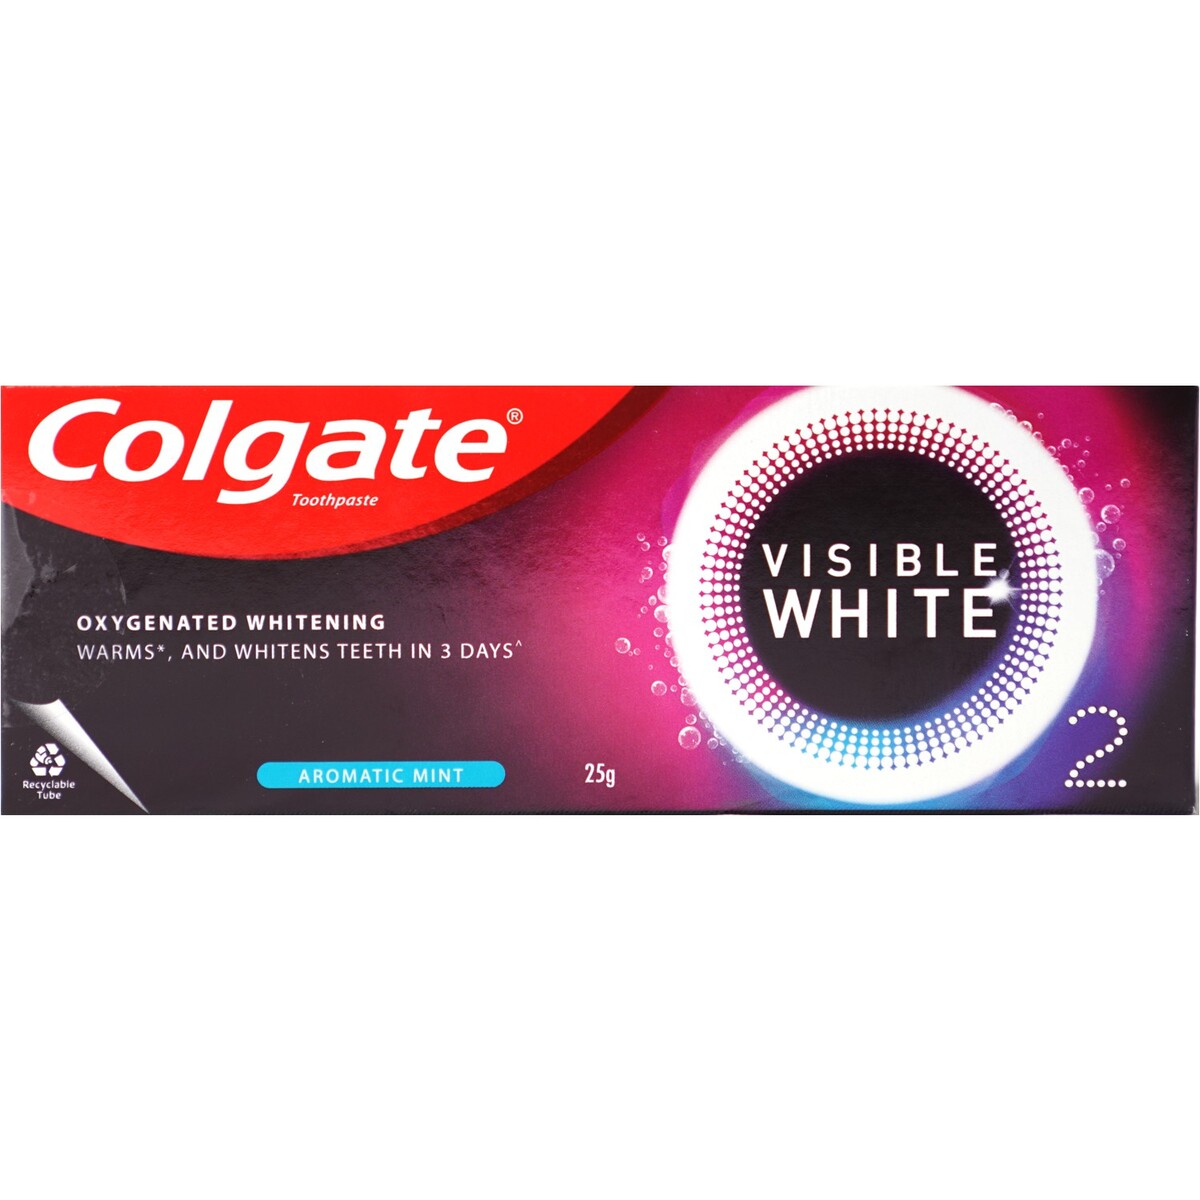 Colgate Toothpaste Visible White O2 Aromatic Mint 25g